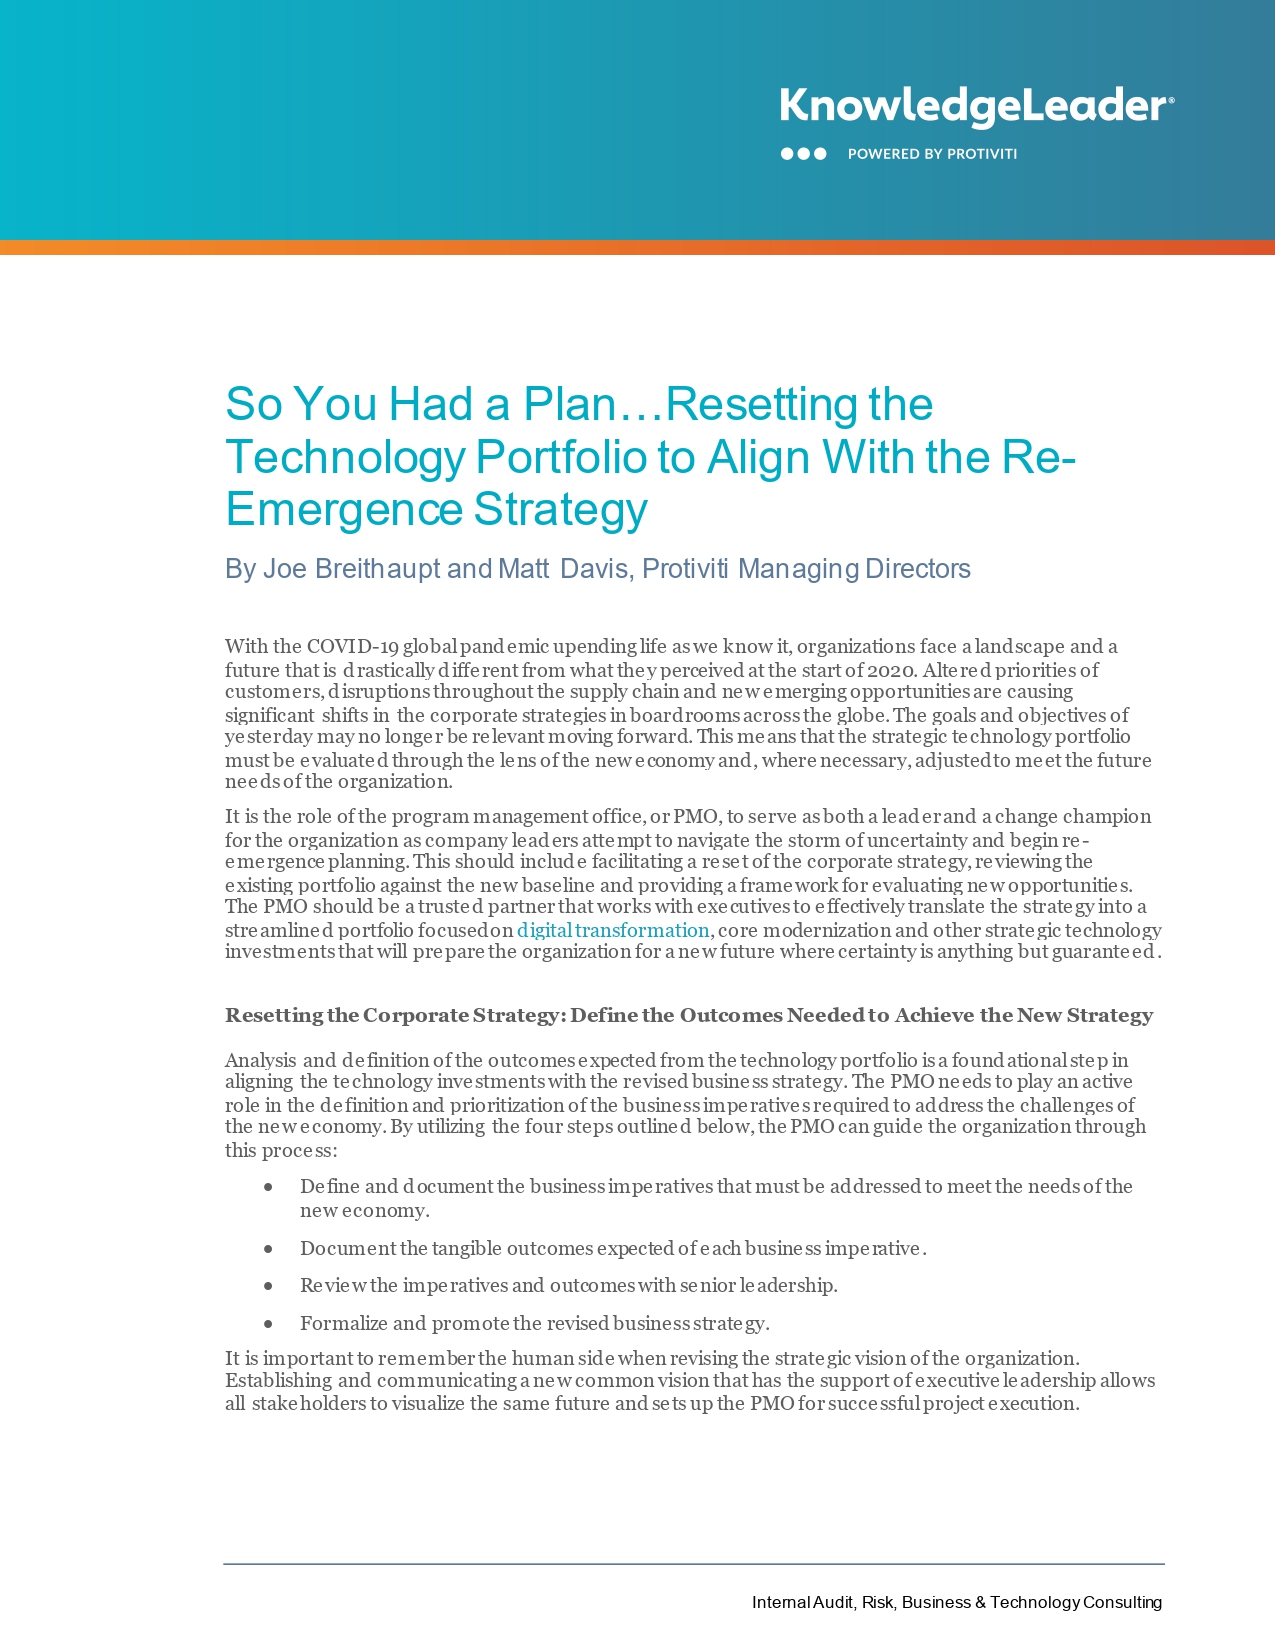 So You Had a Plan...Resetting the Technology Portfolio to Align With the Re-Emergence Strategy